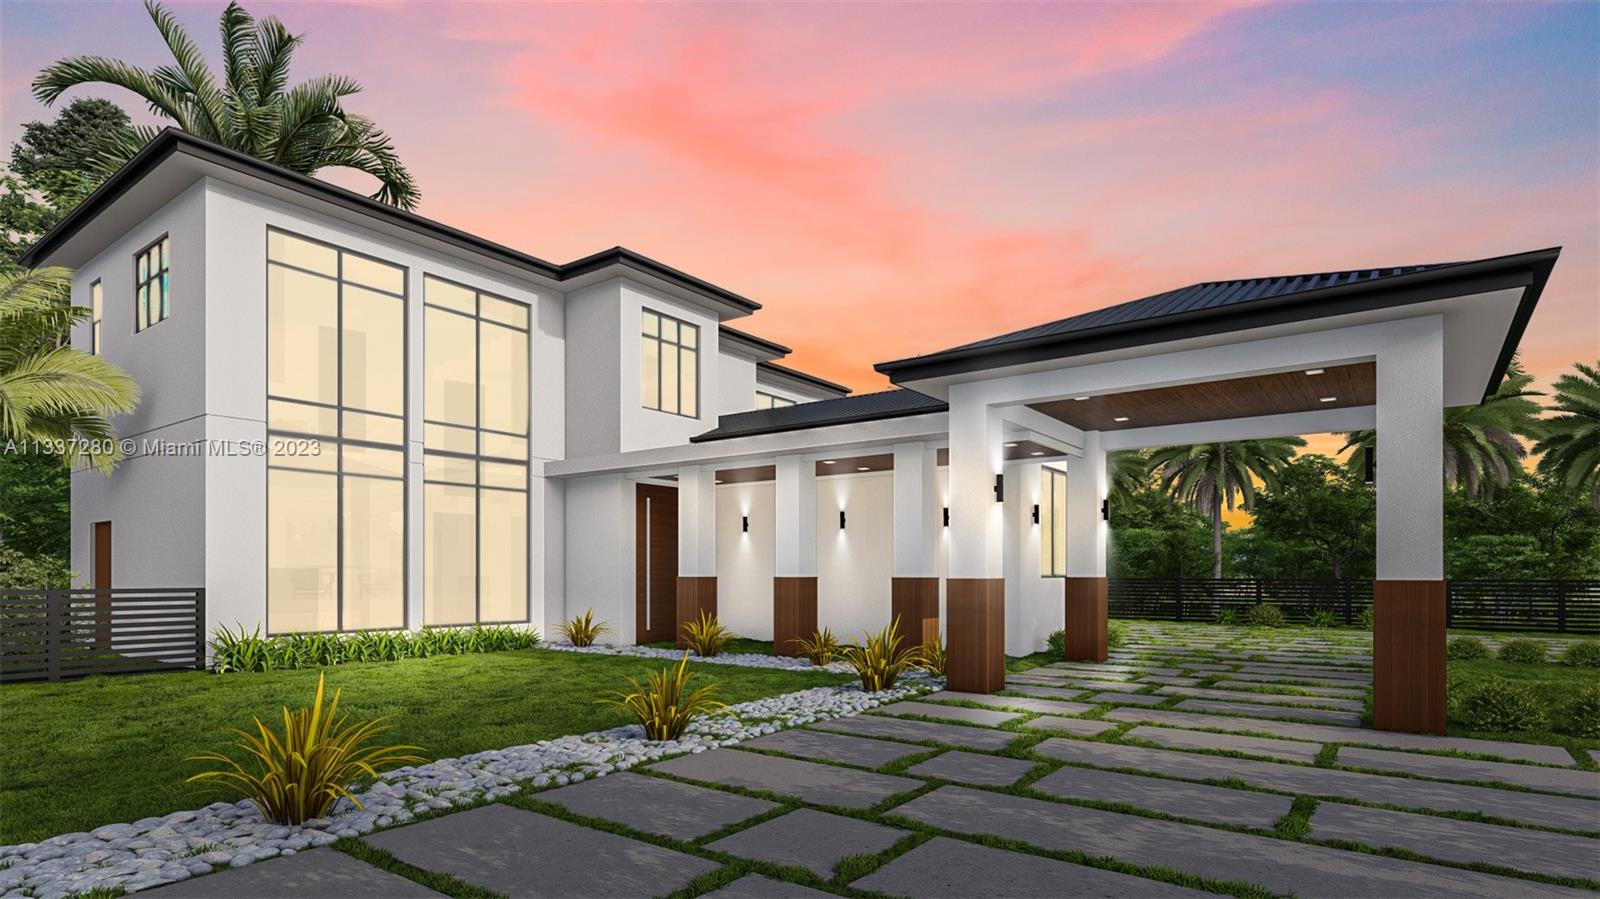 Elevate your Lifestyle in this Stunning Brand-new modern-contemporary residence in Pinecrest. This Elegant masterpiece features the most detailed high-end luxury finishes with over 6,508 sq ft under AC and 7,798 total sq ft. The 7 bedroom 7 bathroom home embodies a modern-classic architecture designed for those who appreciate quality and natural beauty. Welcomed by the grand entrance to an open floor plan, 22' height ceilings, and an abundance of natural light. The home features Peruvian teak wood finishes, chefs kitchen w/ luxury appliances, custom bar w/ illuminated quartz, floating teak stairs. A stunning outdoor patio features a saltwater pool and spa w/ fully equipped summer kitchen. This Dream home is slated for completion in summer 2023. Experience luxury living at its finest!